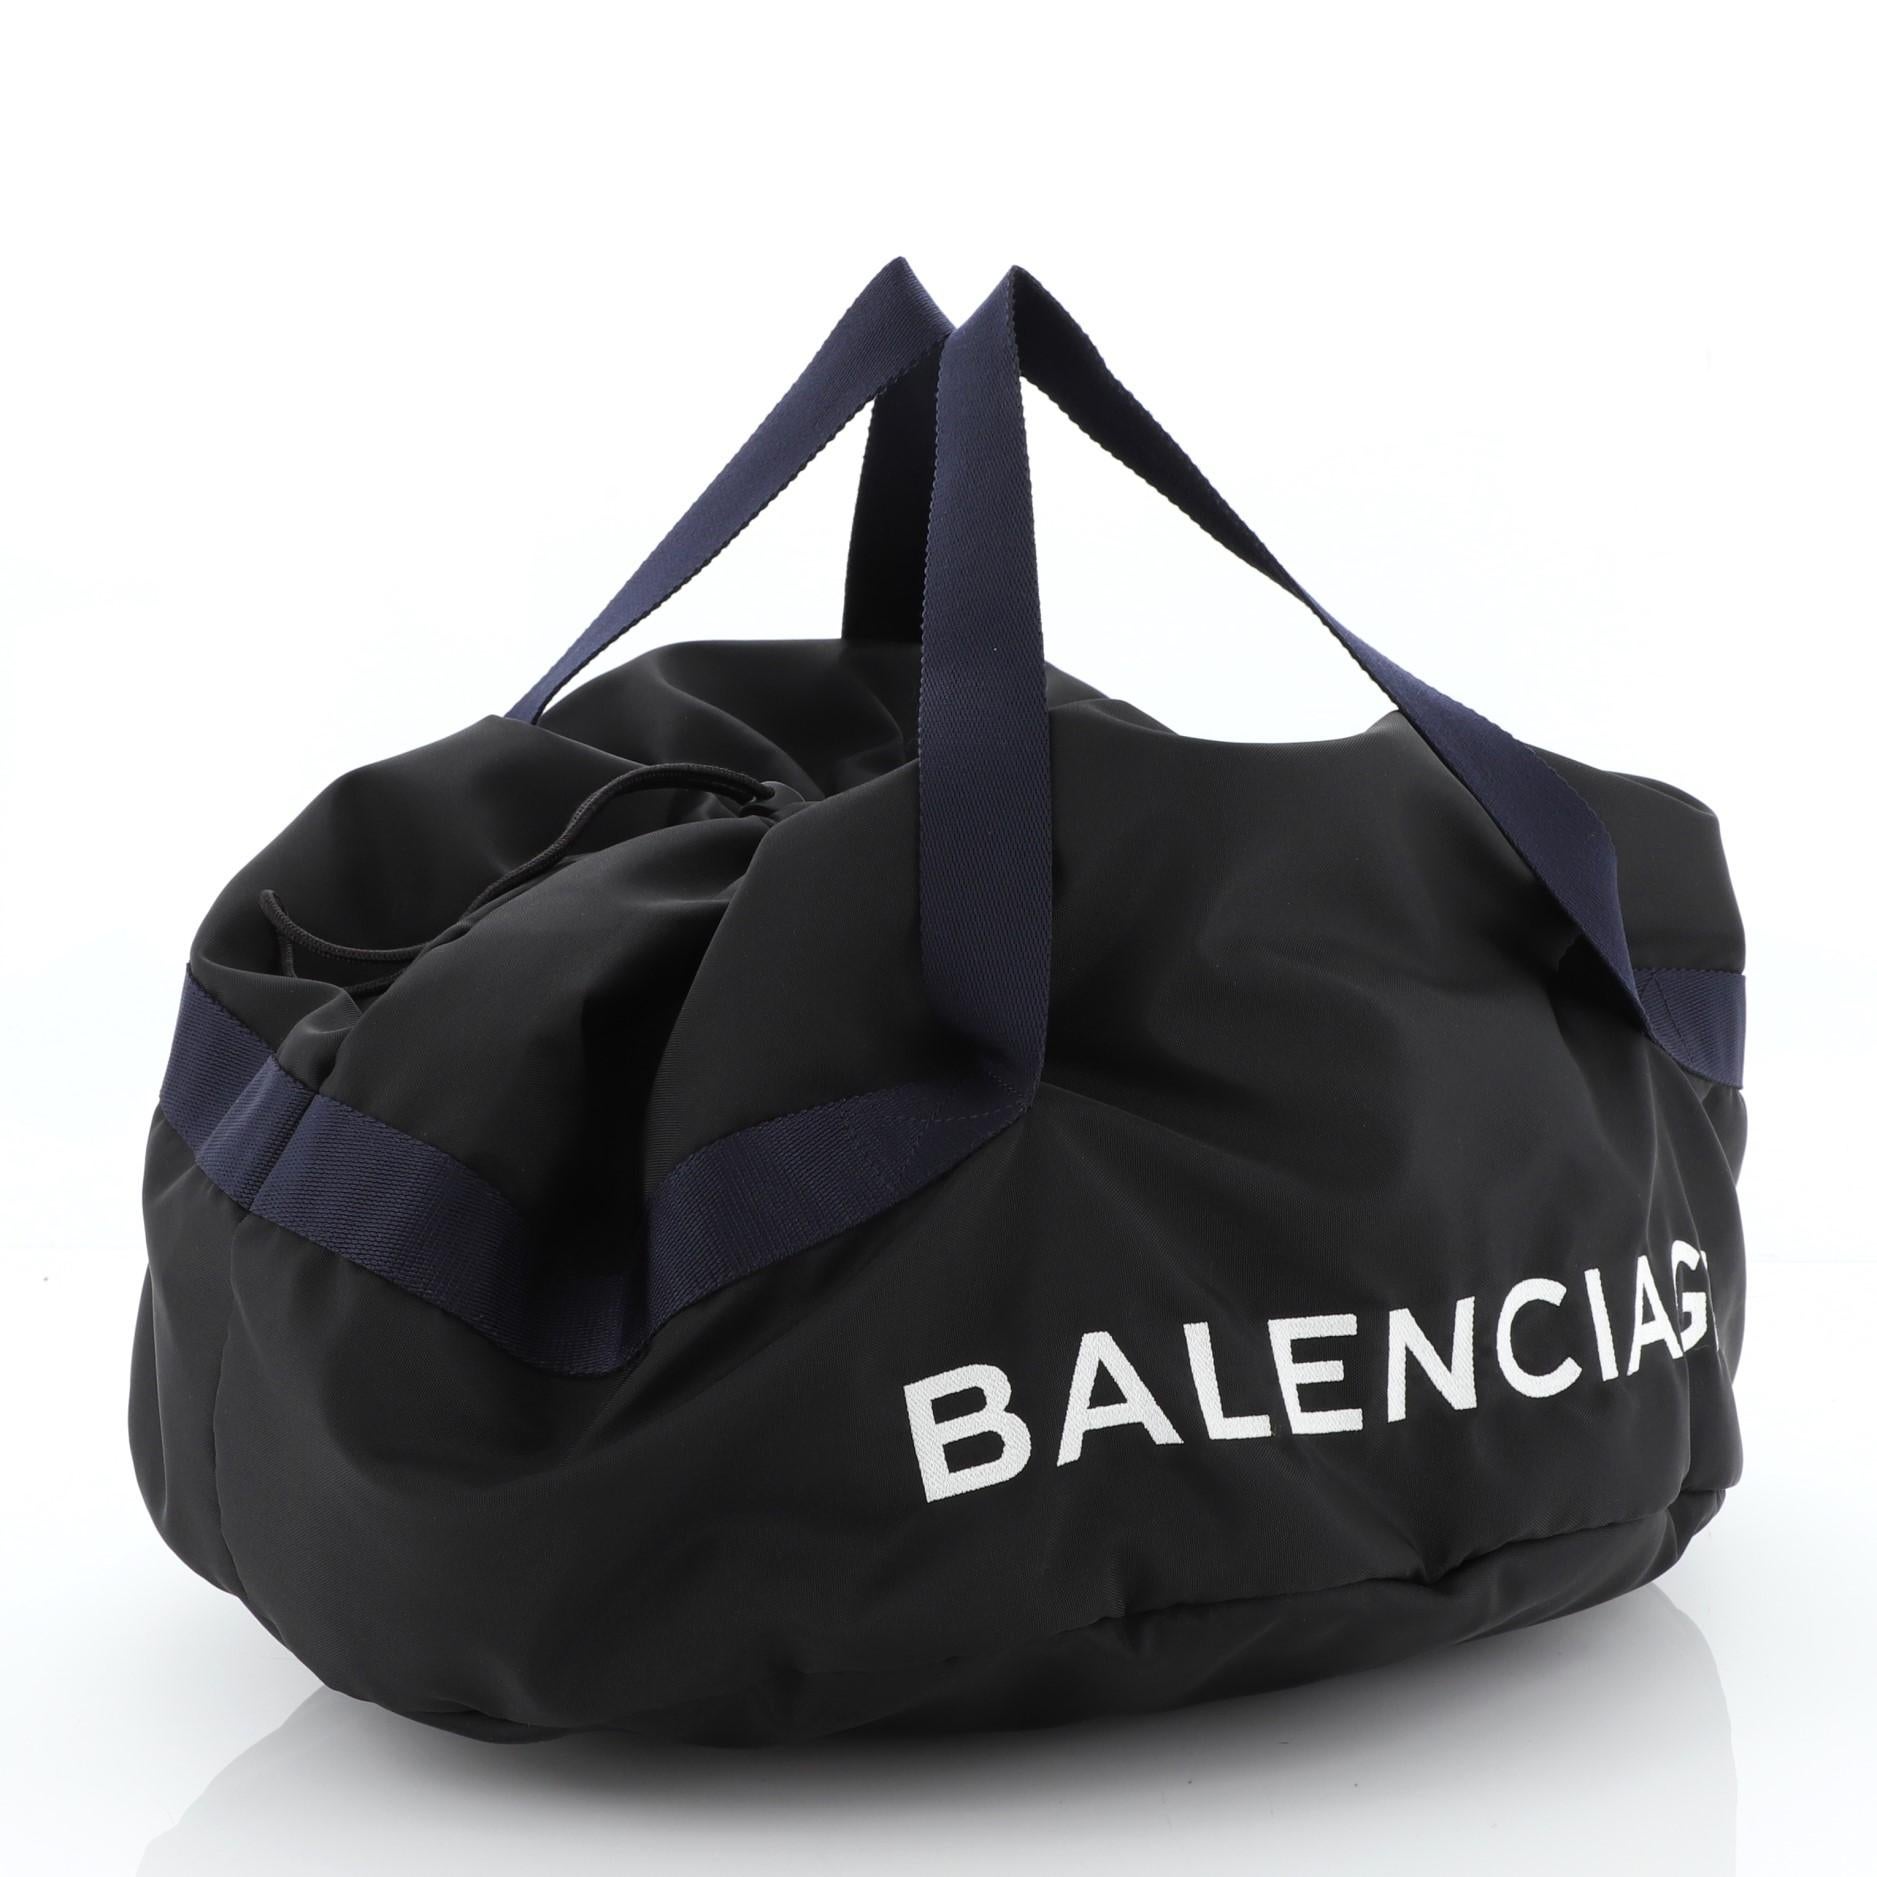 This Balenciaga Wheel Duffle Bag Nylon Small, crafted in black nylon, features dual handles, printed Balenciaga lettering at front and black-tone hardware. It opens to a black nylon interior.

Estimated Retail Price: $1,185
Condition: Excellent.